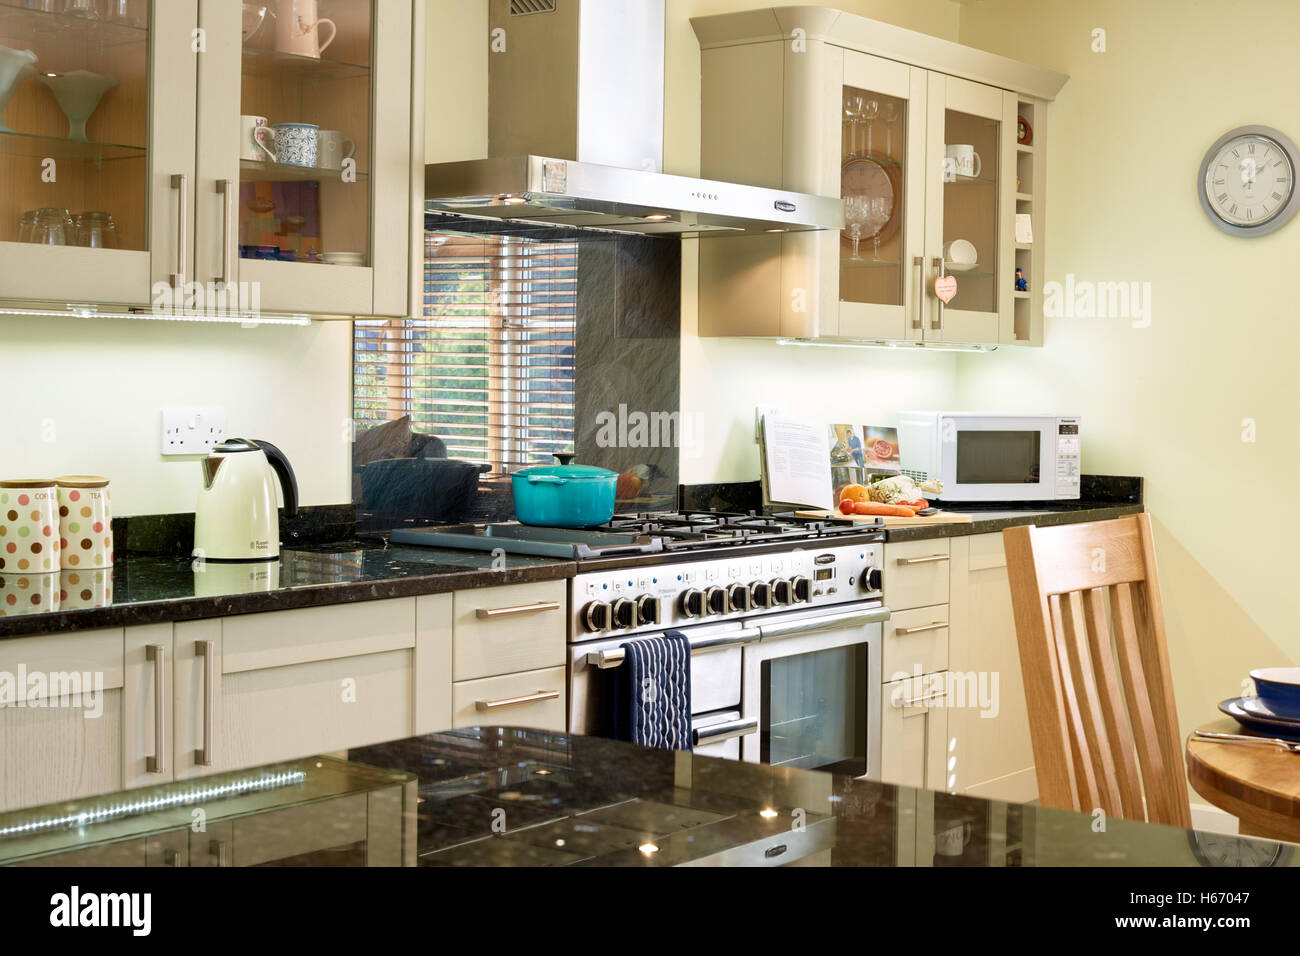 A contemporary open plan kitchen incorporating a range cooker, hood & granite work surfaces. Oxfordshire, UK Stock Photo